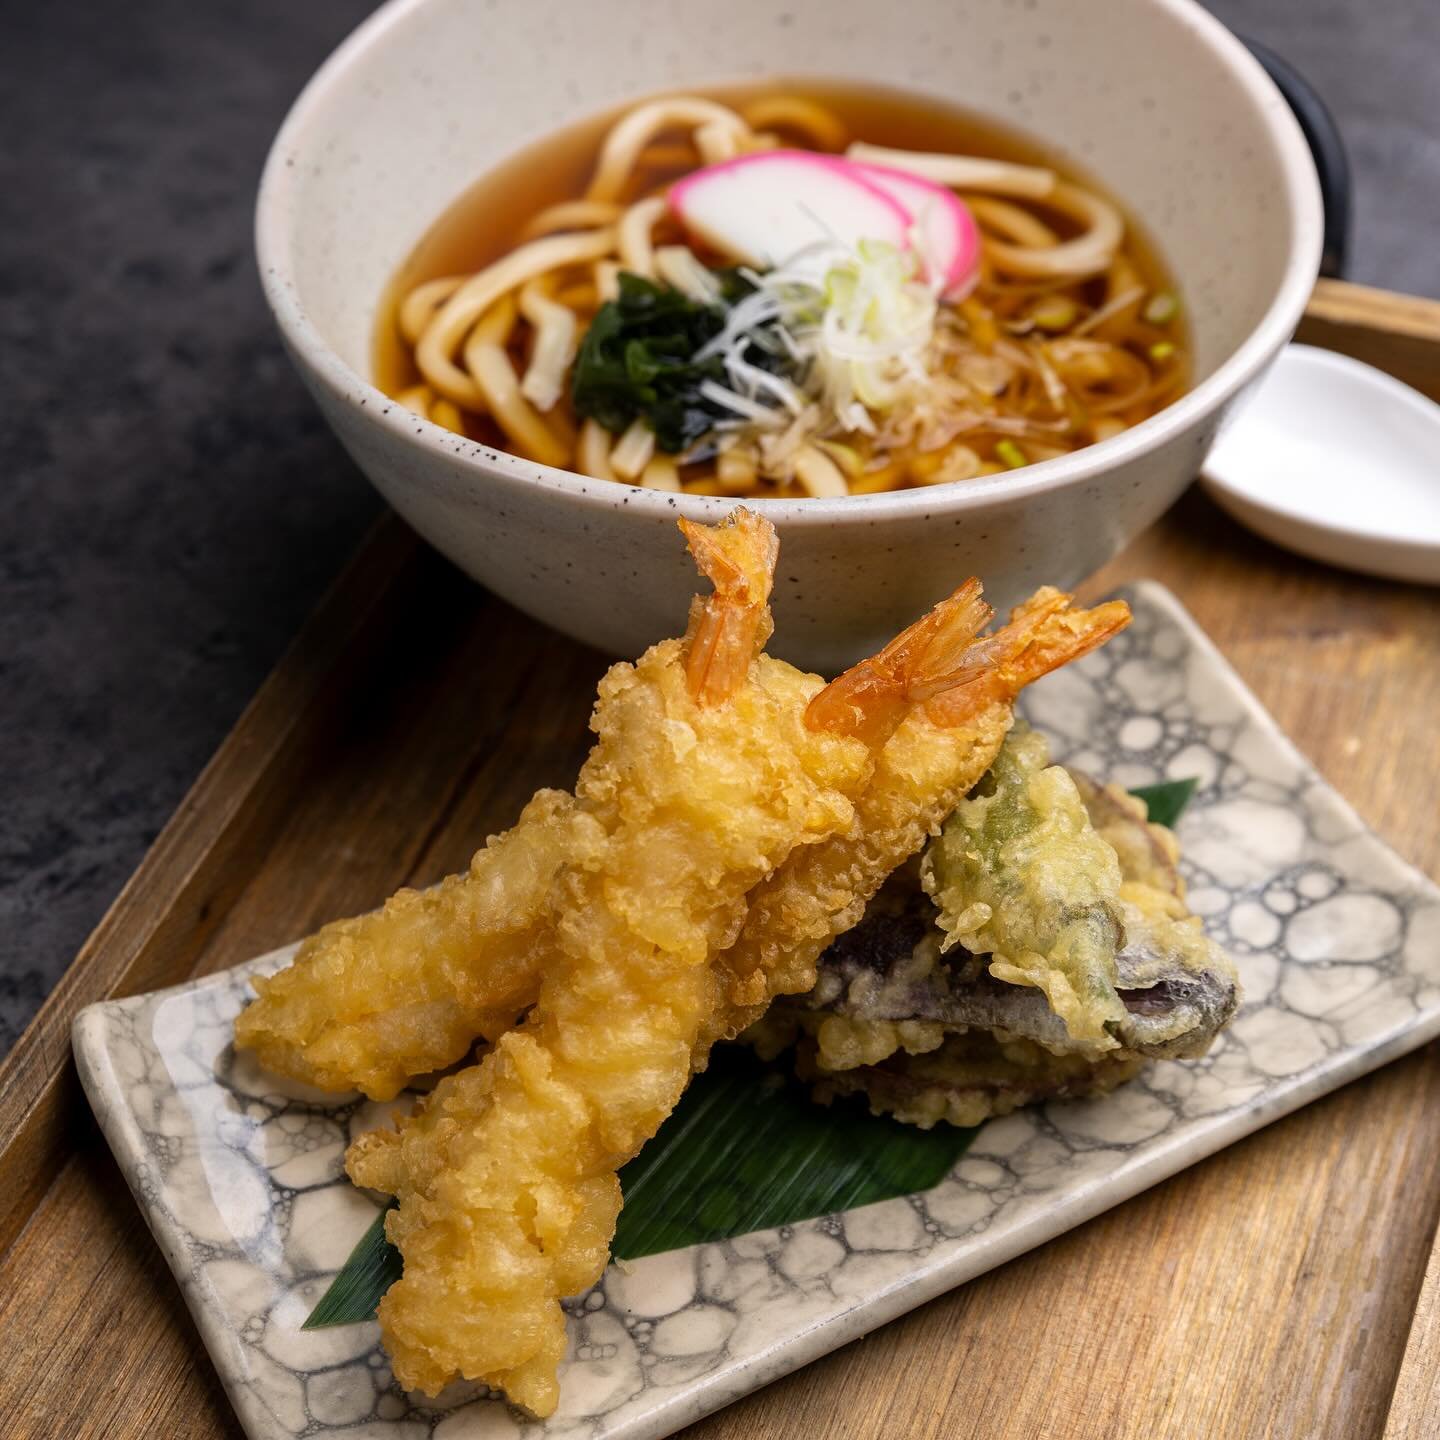 Slurp up some comfort with our Japanese Tempura Udon, served in a hot dashi broth with kamaboko and green onions. Choose your pairing: Vegetable Tempura for a light and crispy mix, Shrimp &amp; Veggie Tempura for a seafood twist, or Pork Belly &amp; 